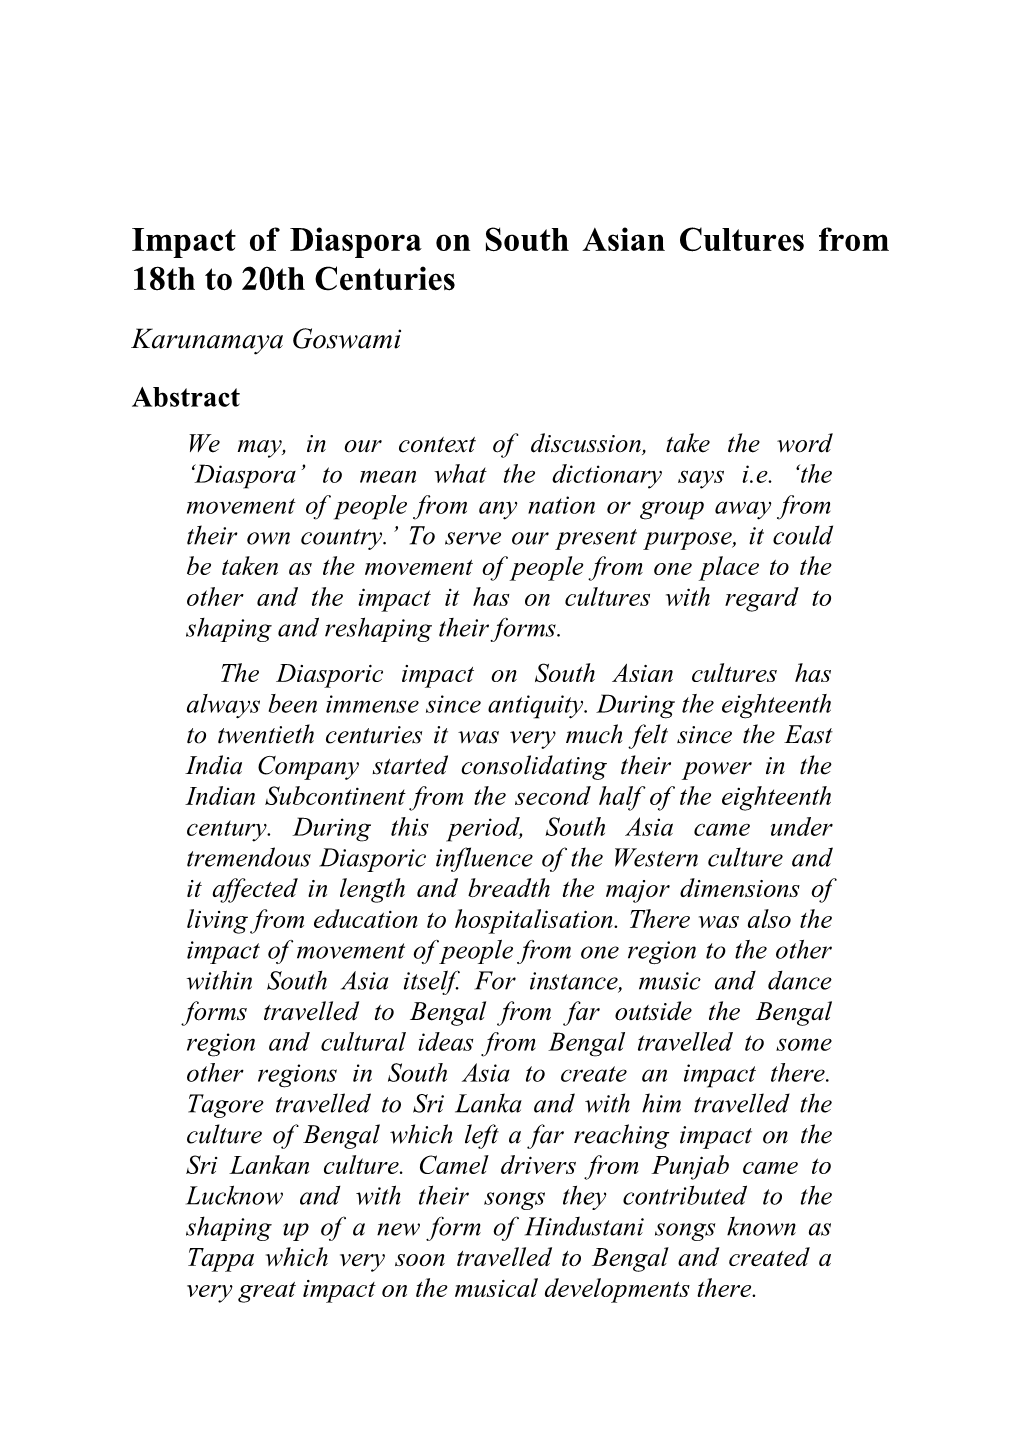 Impact of Diaspora on South Asian Cultures from 18Th to 20Th Centuries